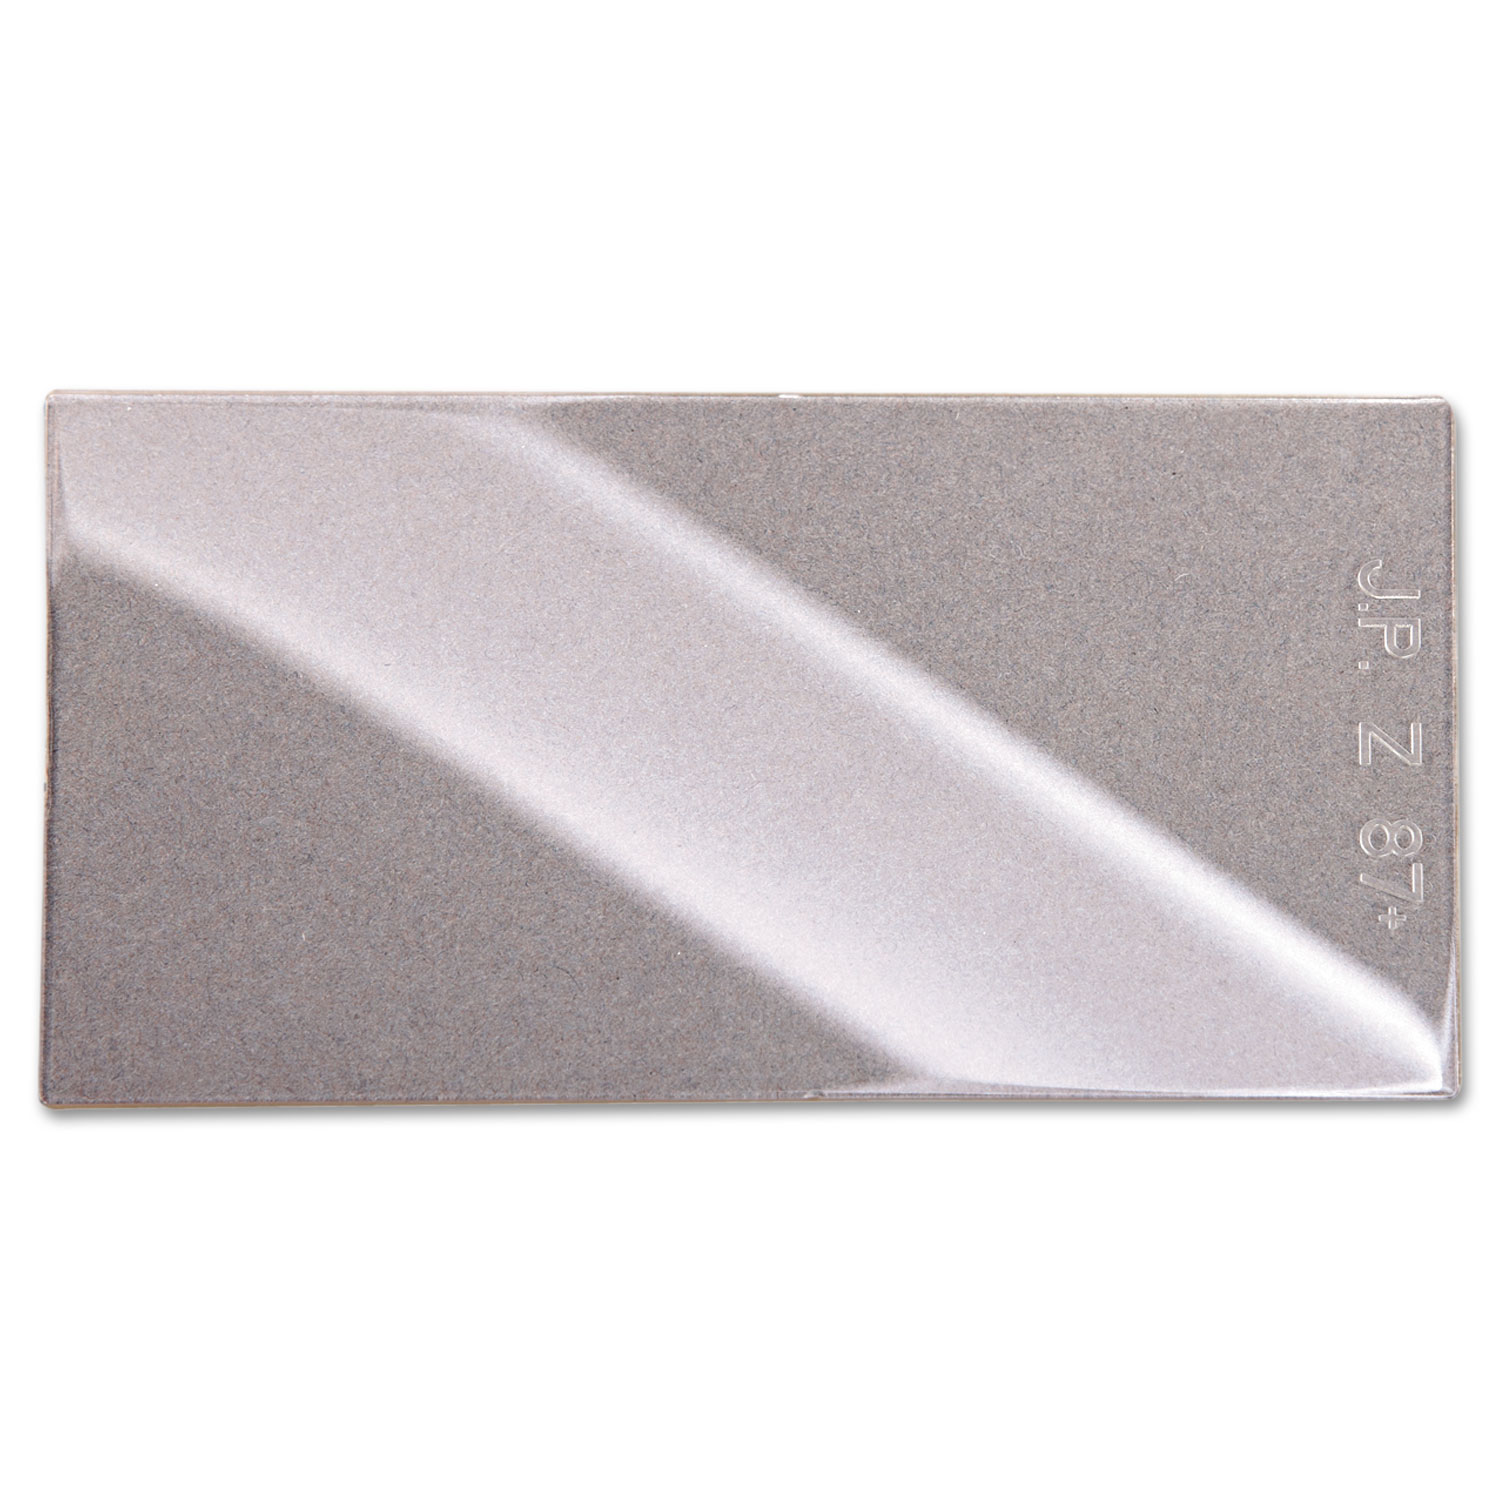 NEXGEN Inner Safety Plate, Polycarbonate, Clear